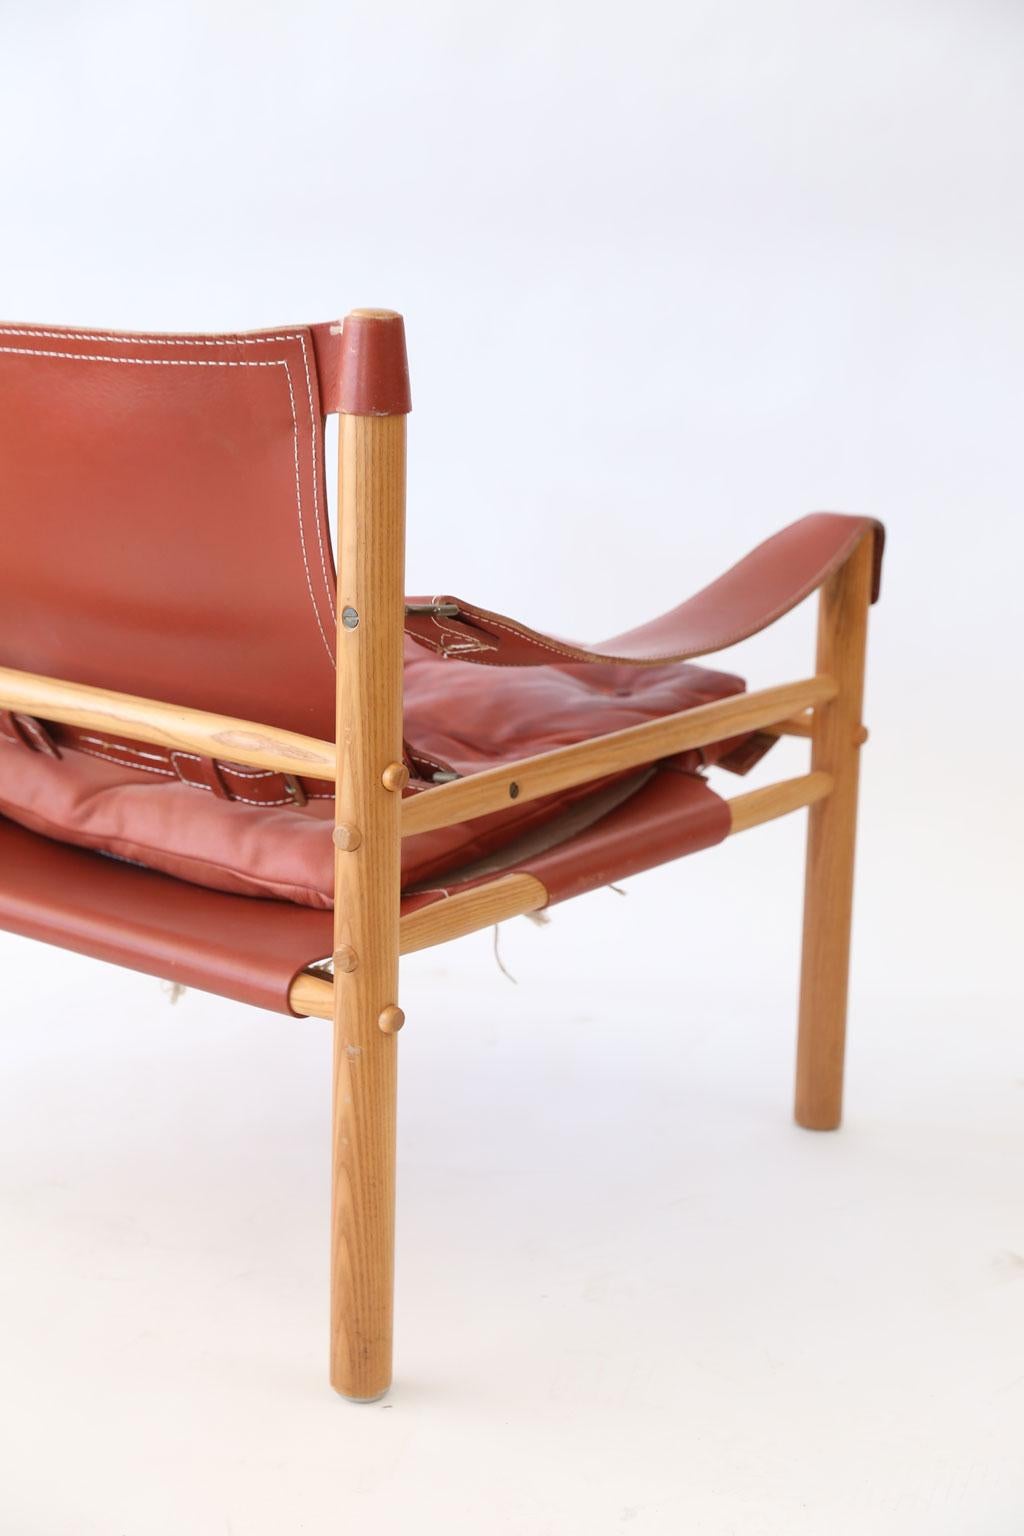 Pair of Arne Norell Sirocco chairs, collapsible safari lounge chairs fabricated by Norell Møbel AB (1964, Aneby Sweden) in light ashwood using dowel and red leather strap construction.